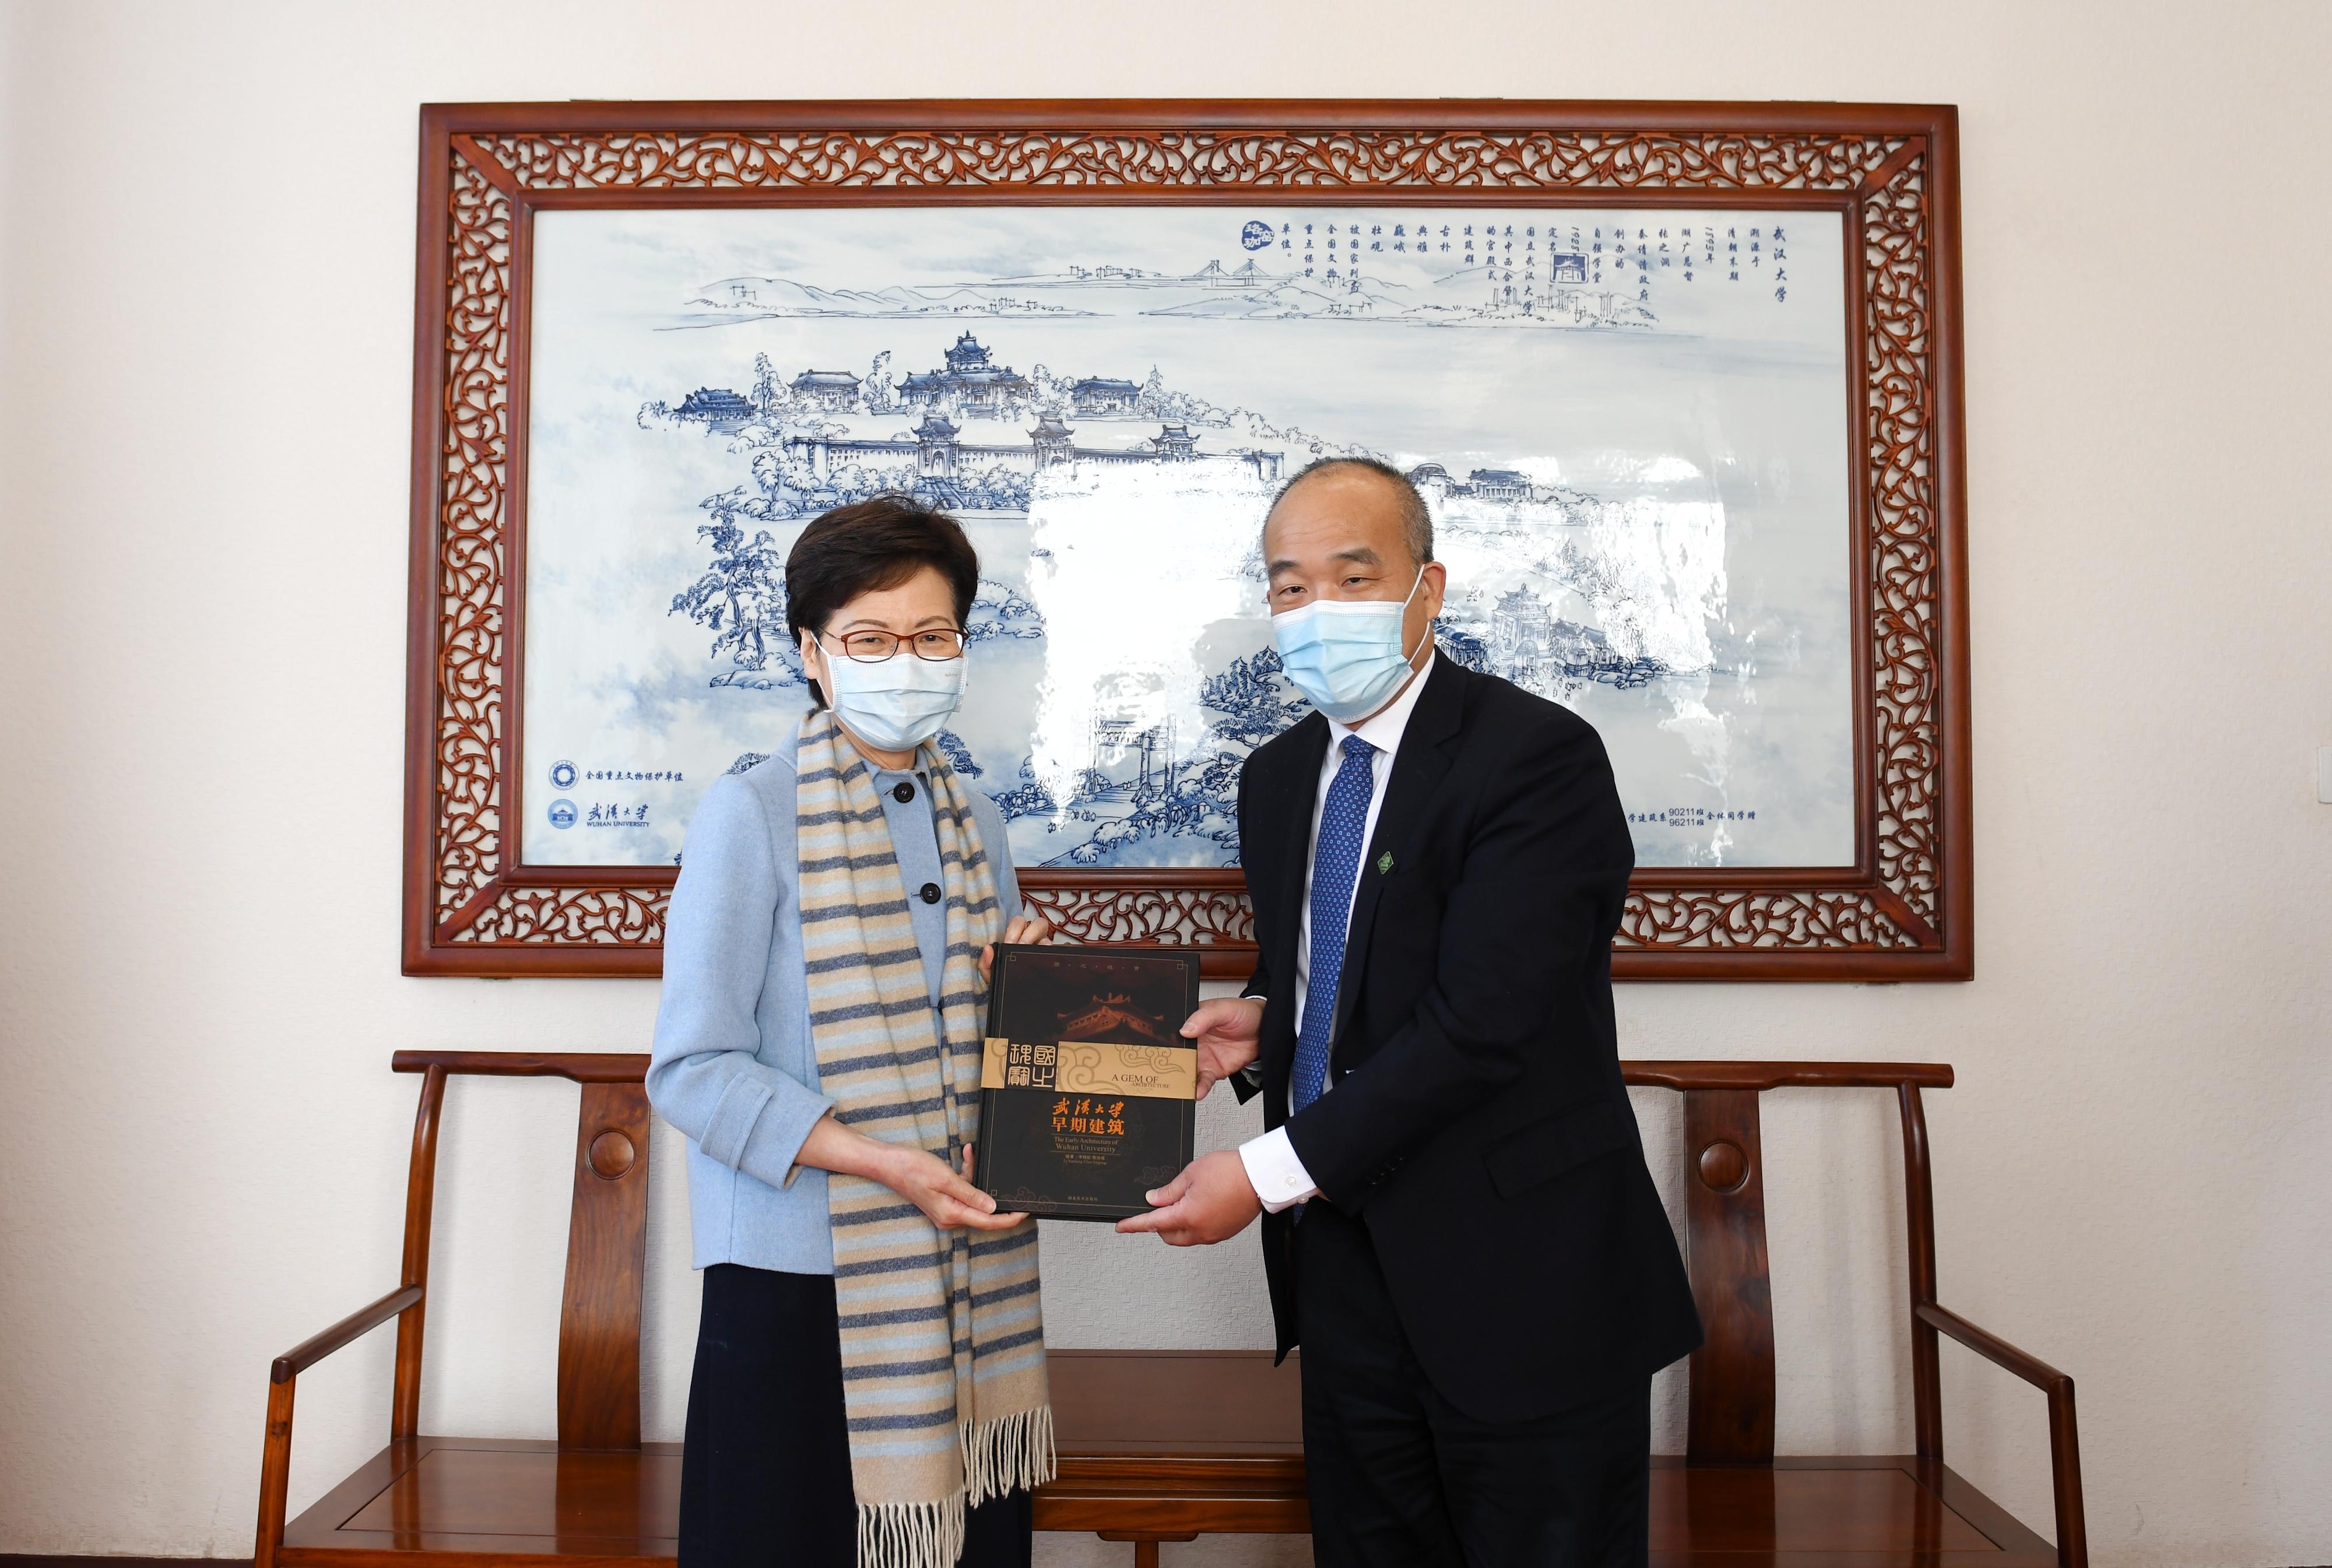 The Chief Executive, Mrs Carrie Lam, visited Wuhan University in Wuhan today (December 1). Photo shows Mrs Lam (left) receiving a souvenir from the President of Wuhan University, Professor Dou Xiankang (right).